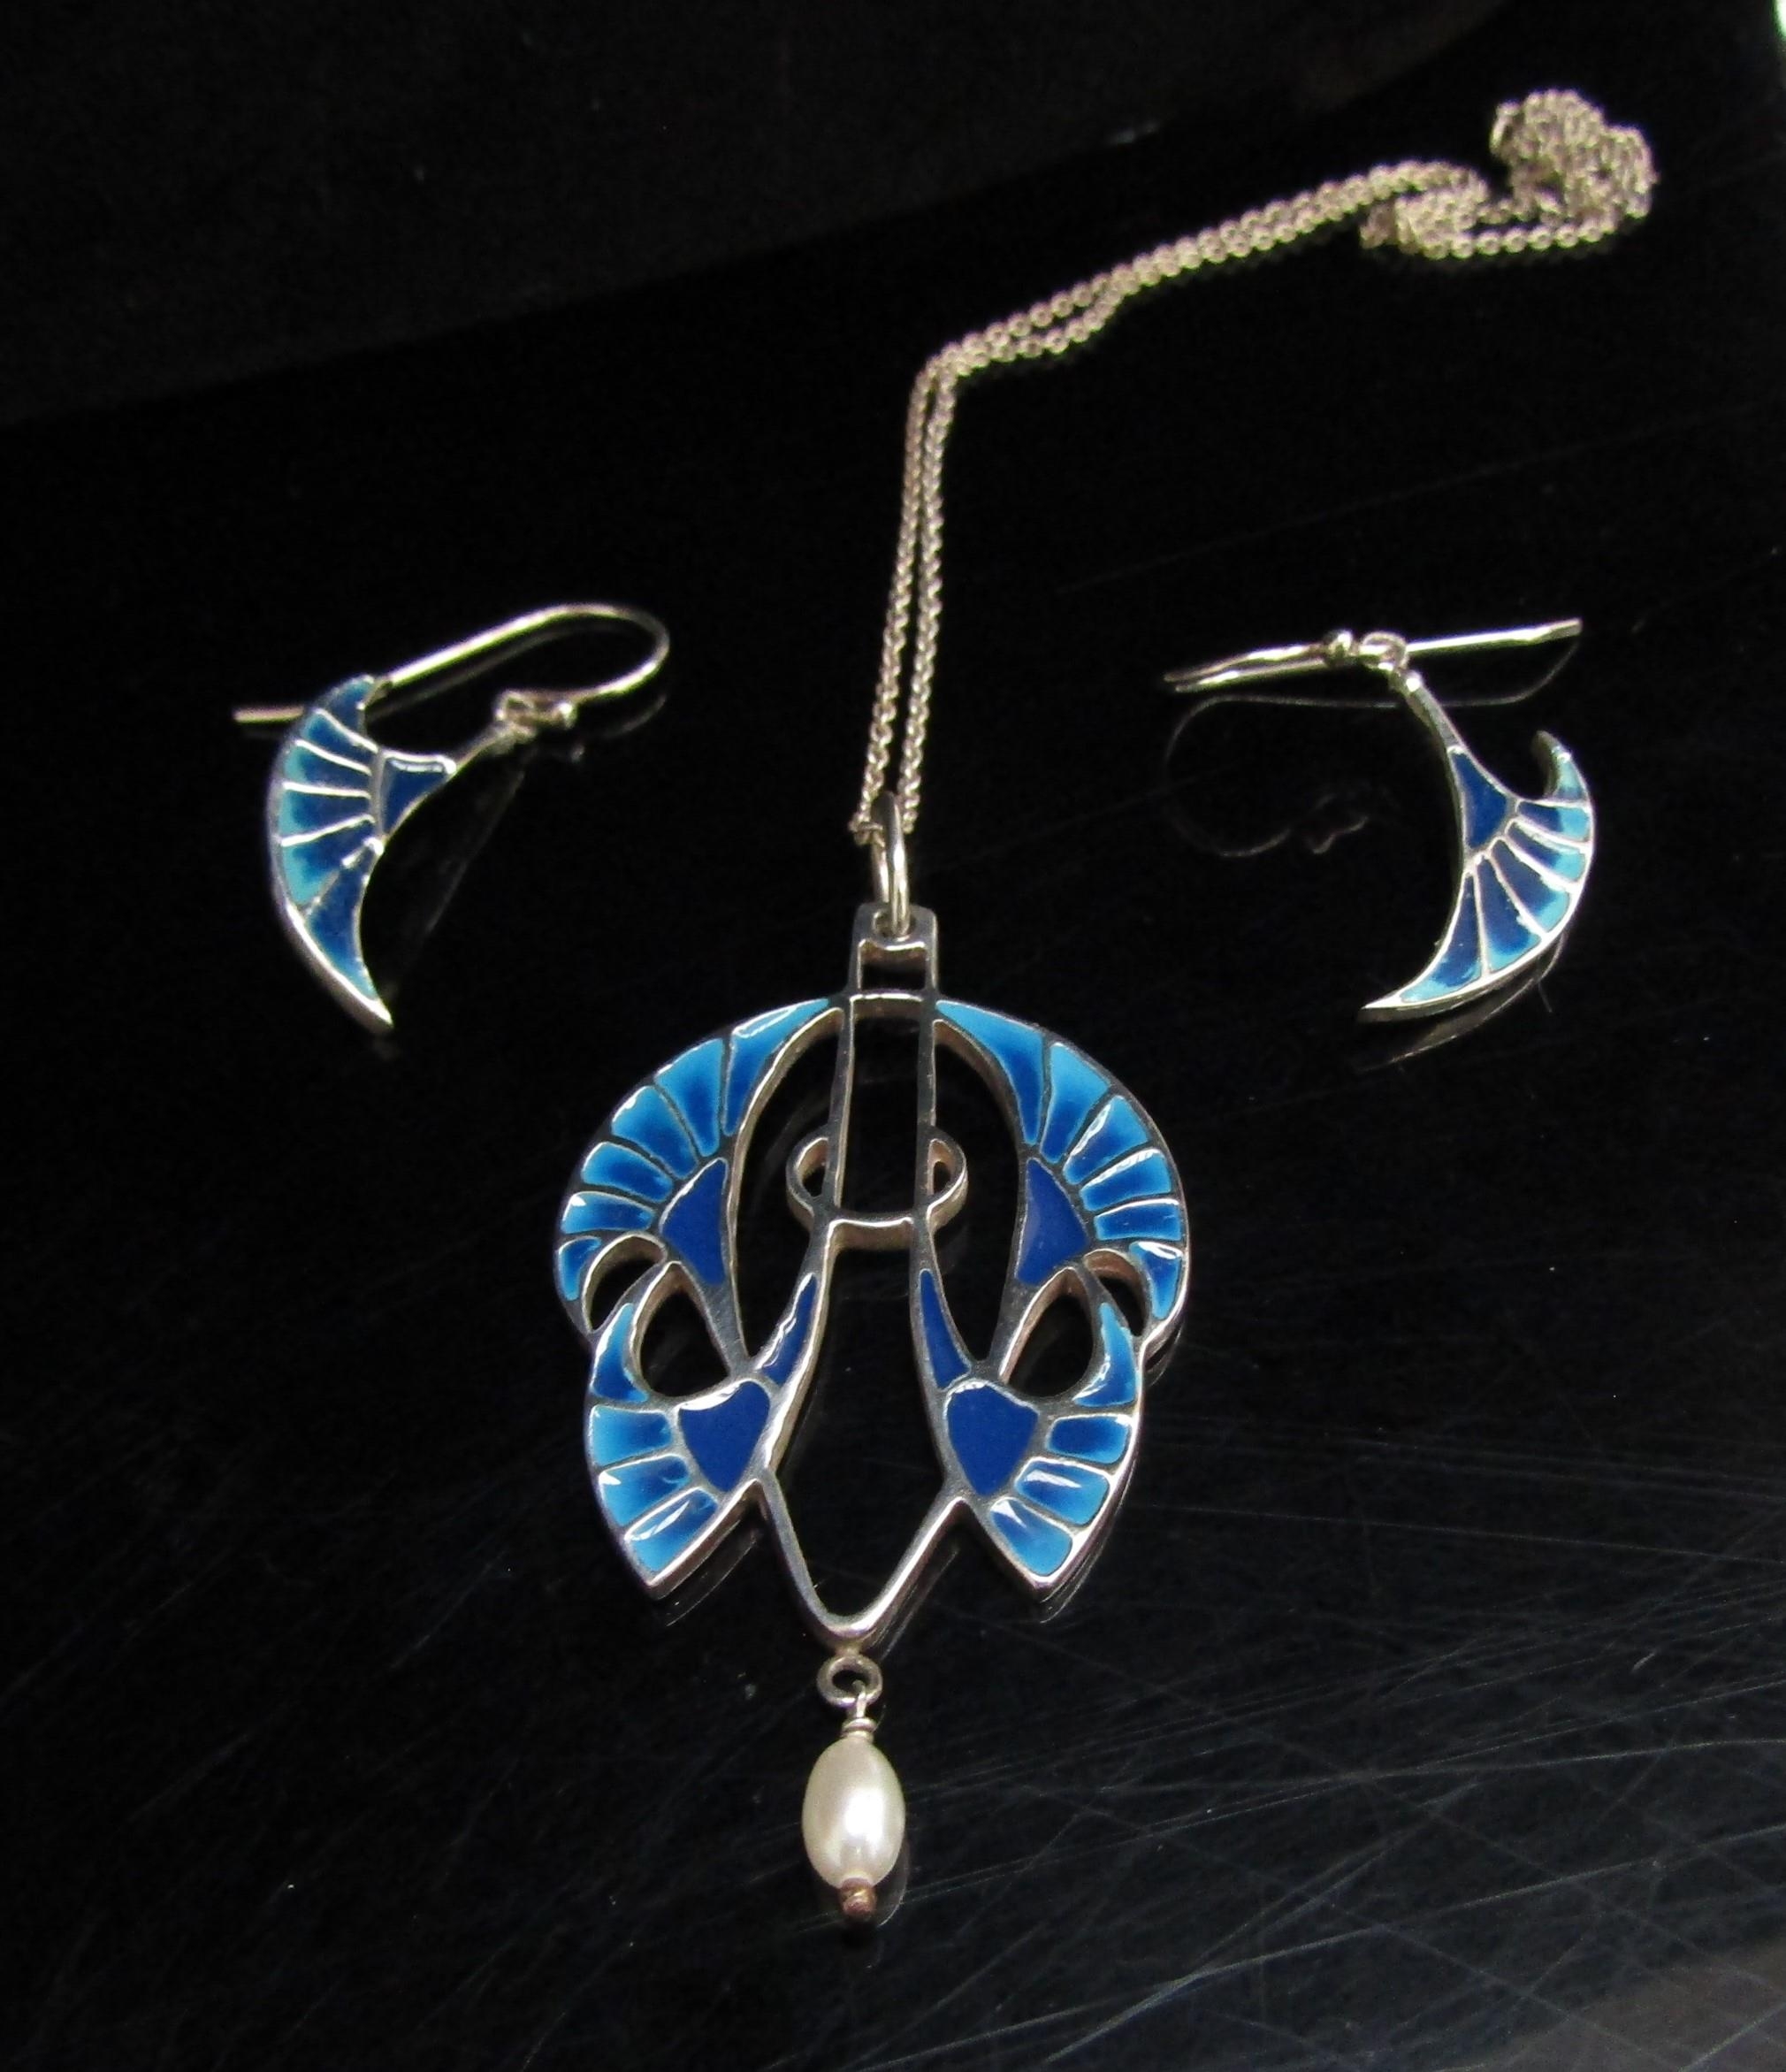 An Art Nouveau revival silver and enamel pendant necklace with pearl drop, and matching earrings